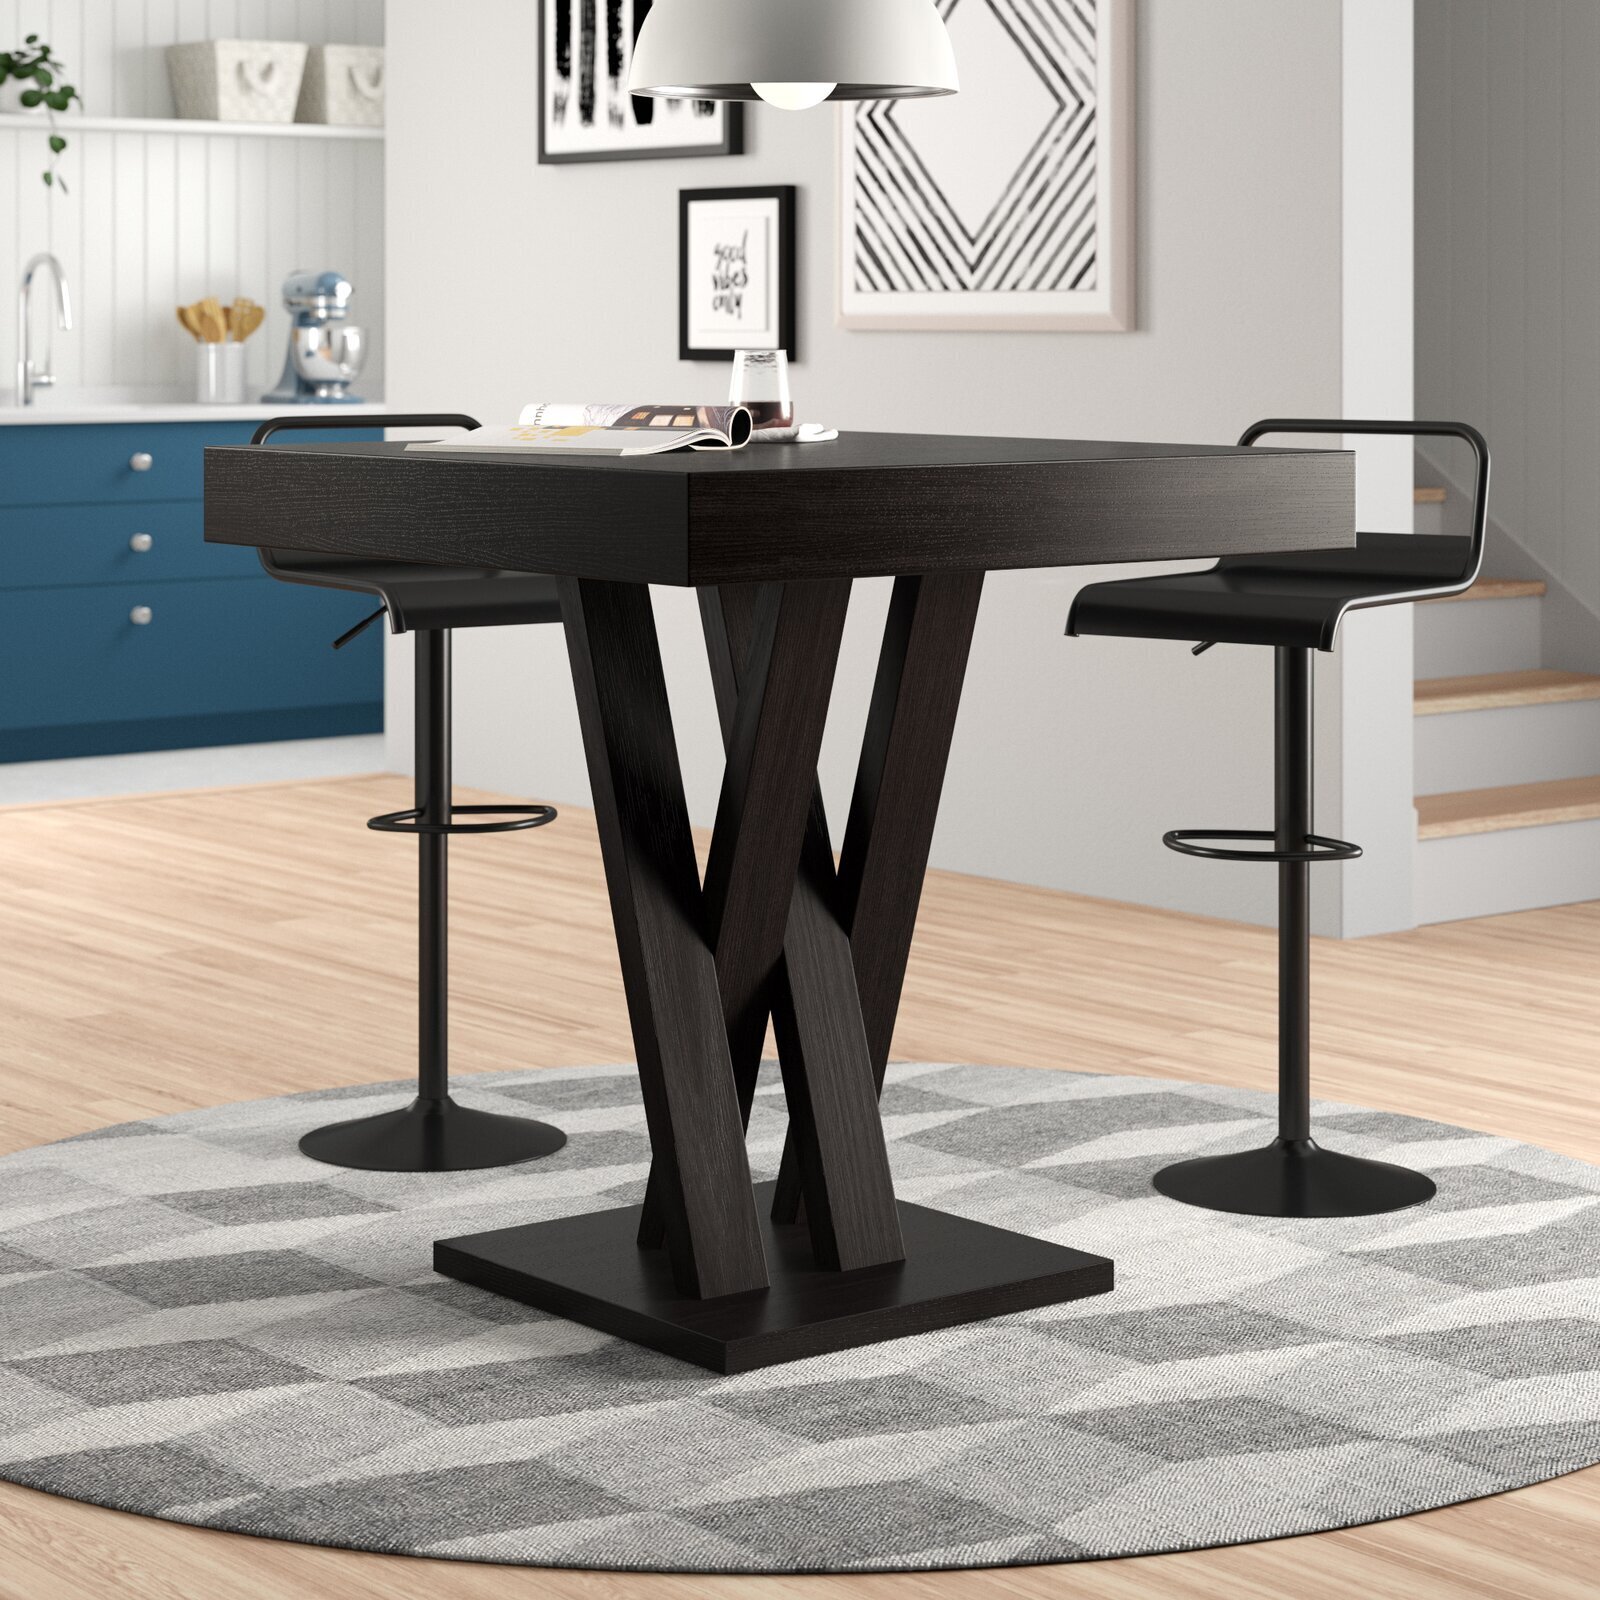 Contemporary Wooden Tulip Bar Table with Vertical Legs